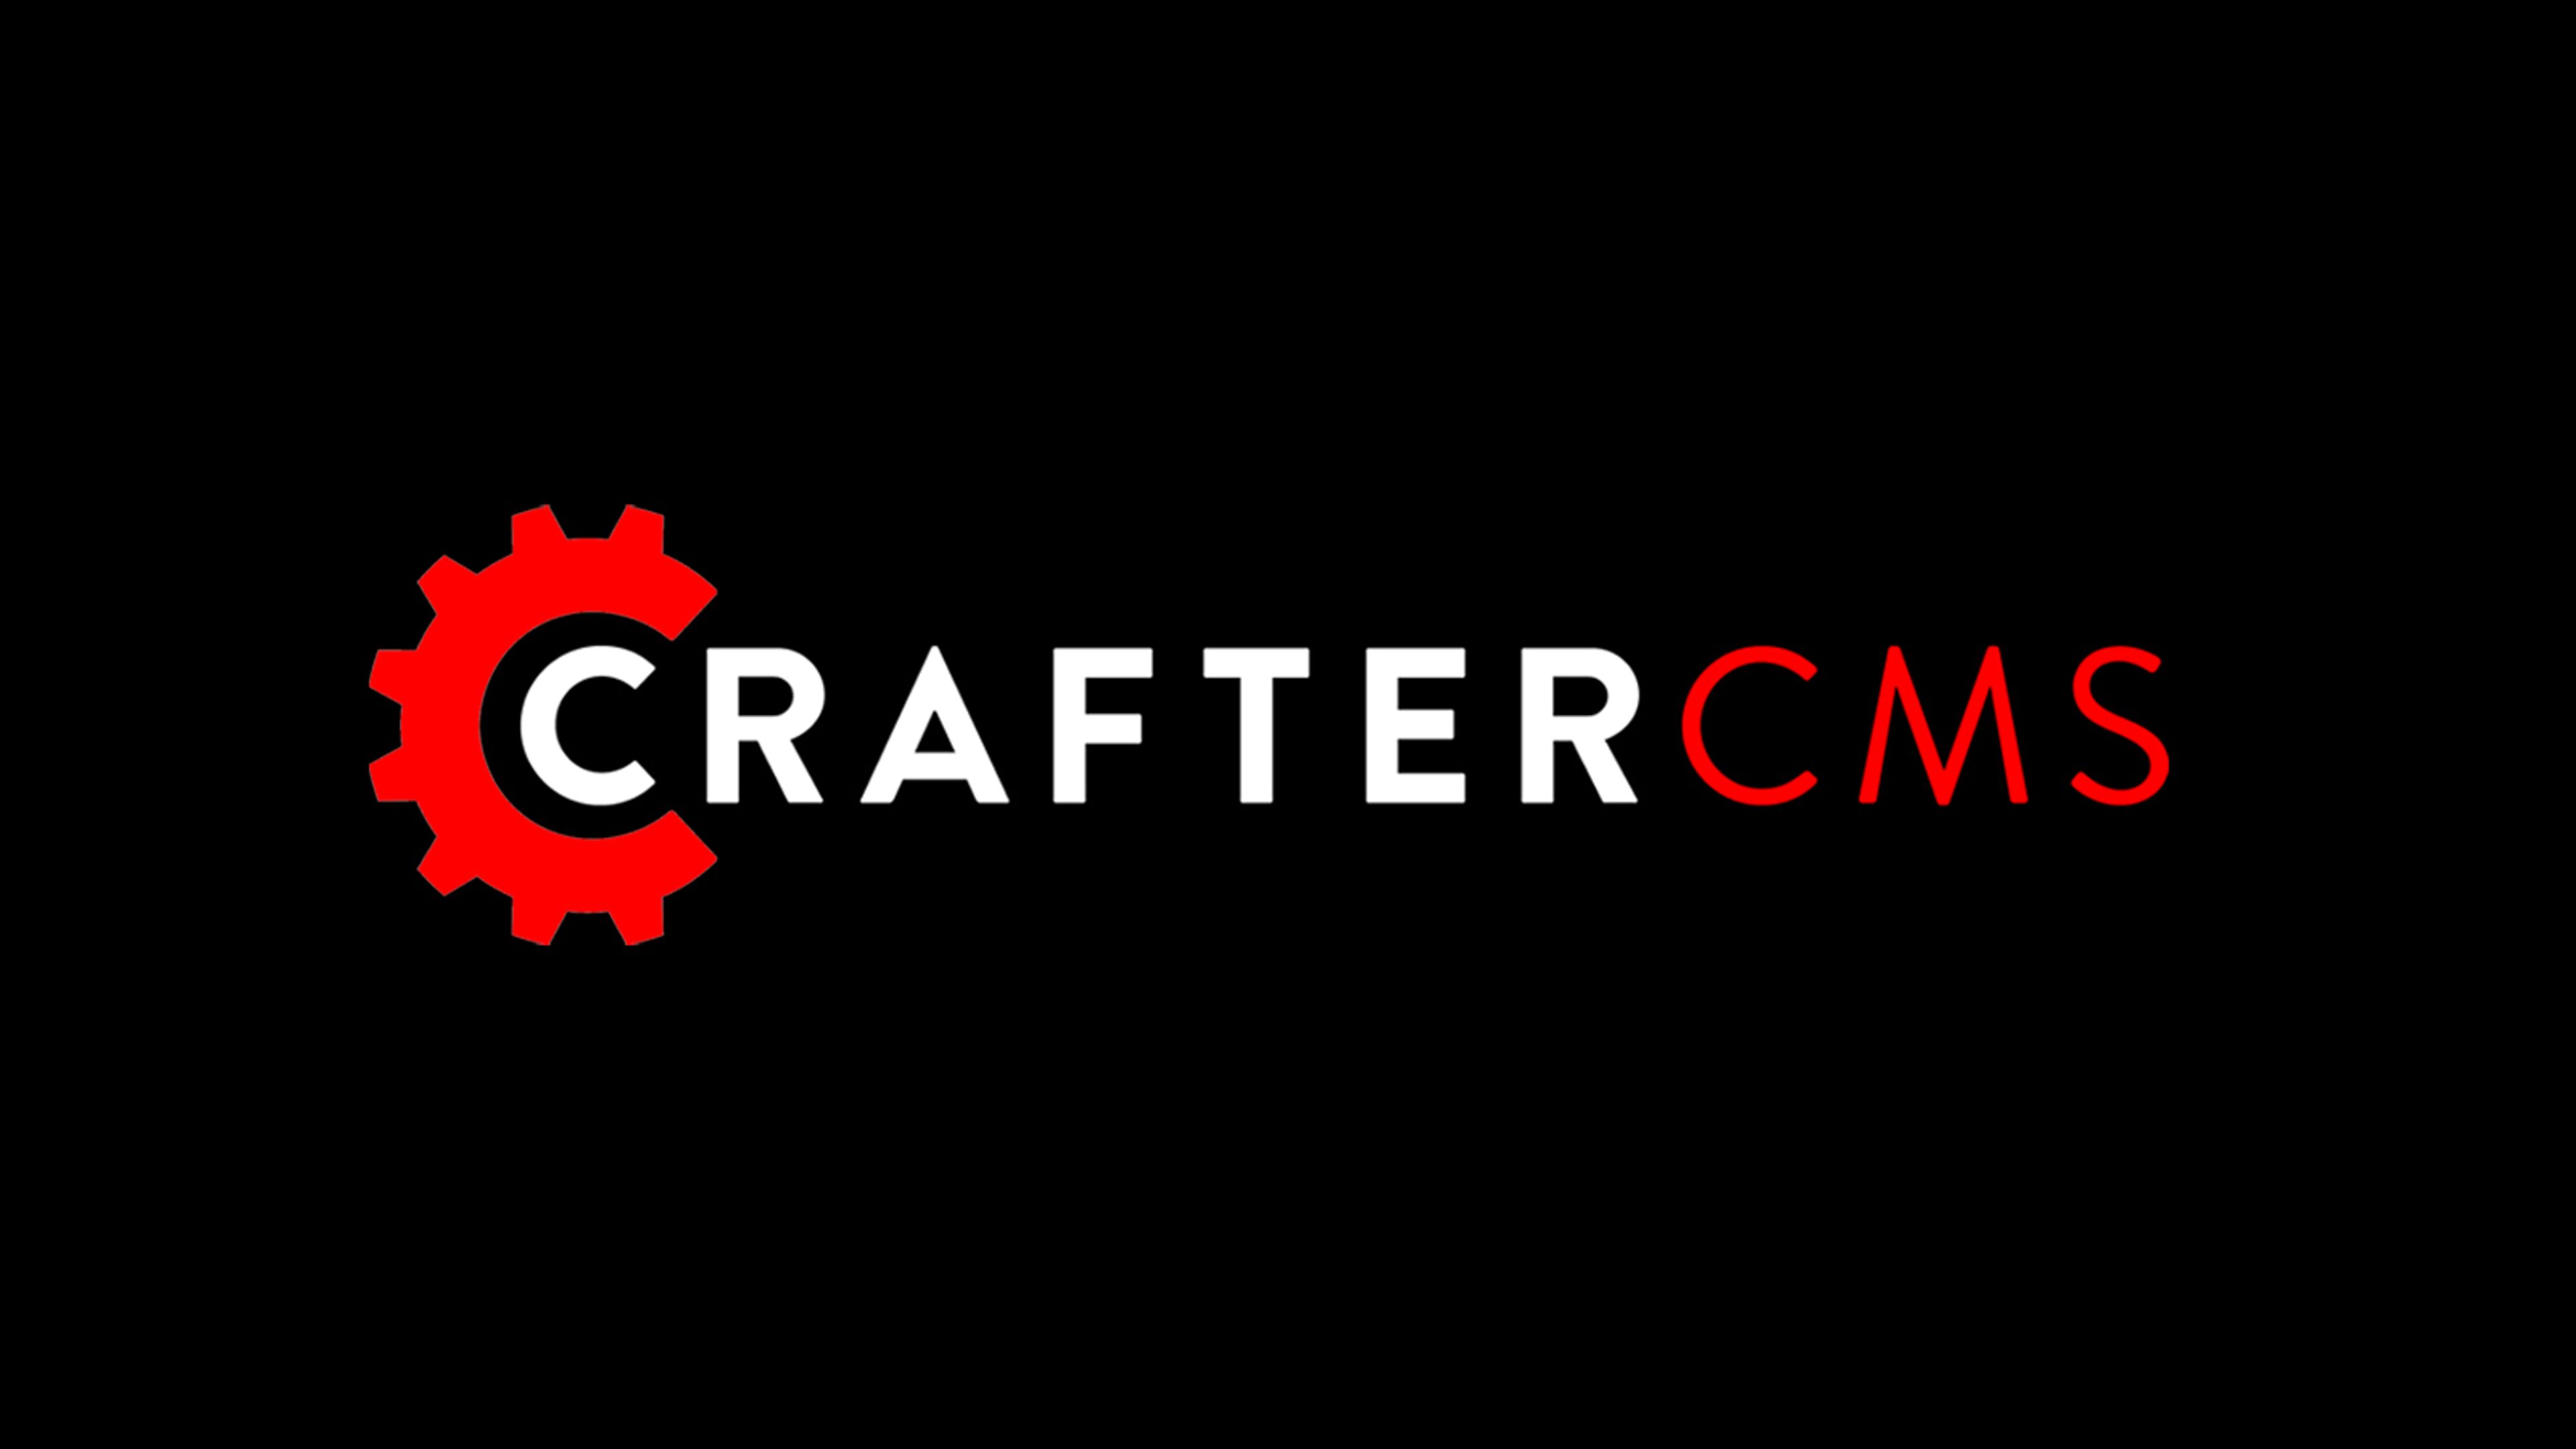 Image of CrafterCMS logo against a black background